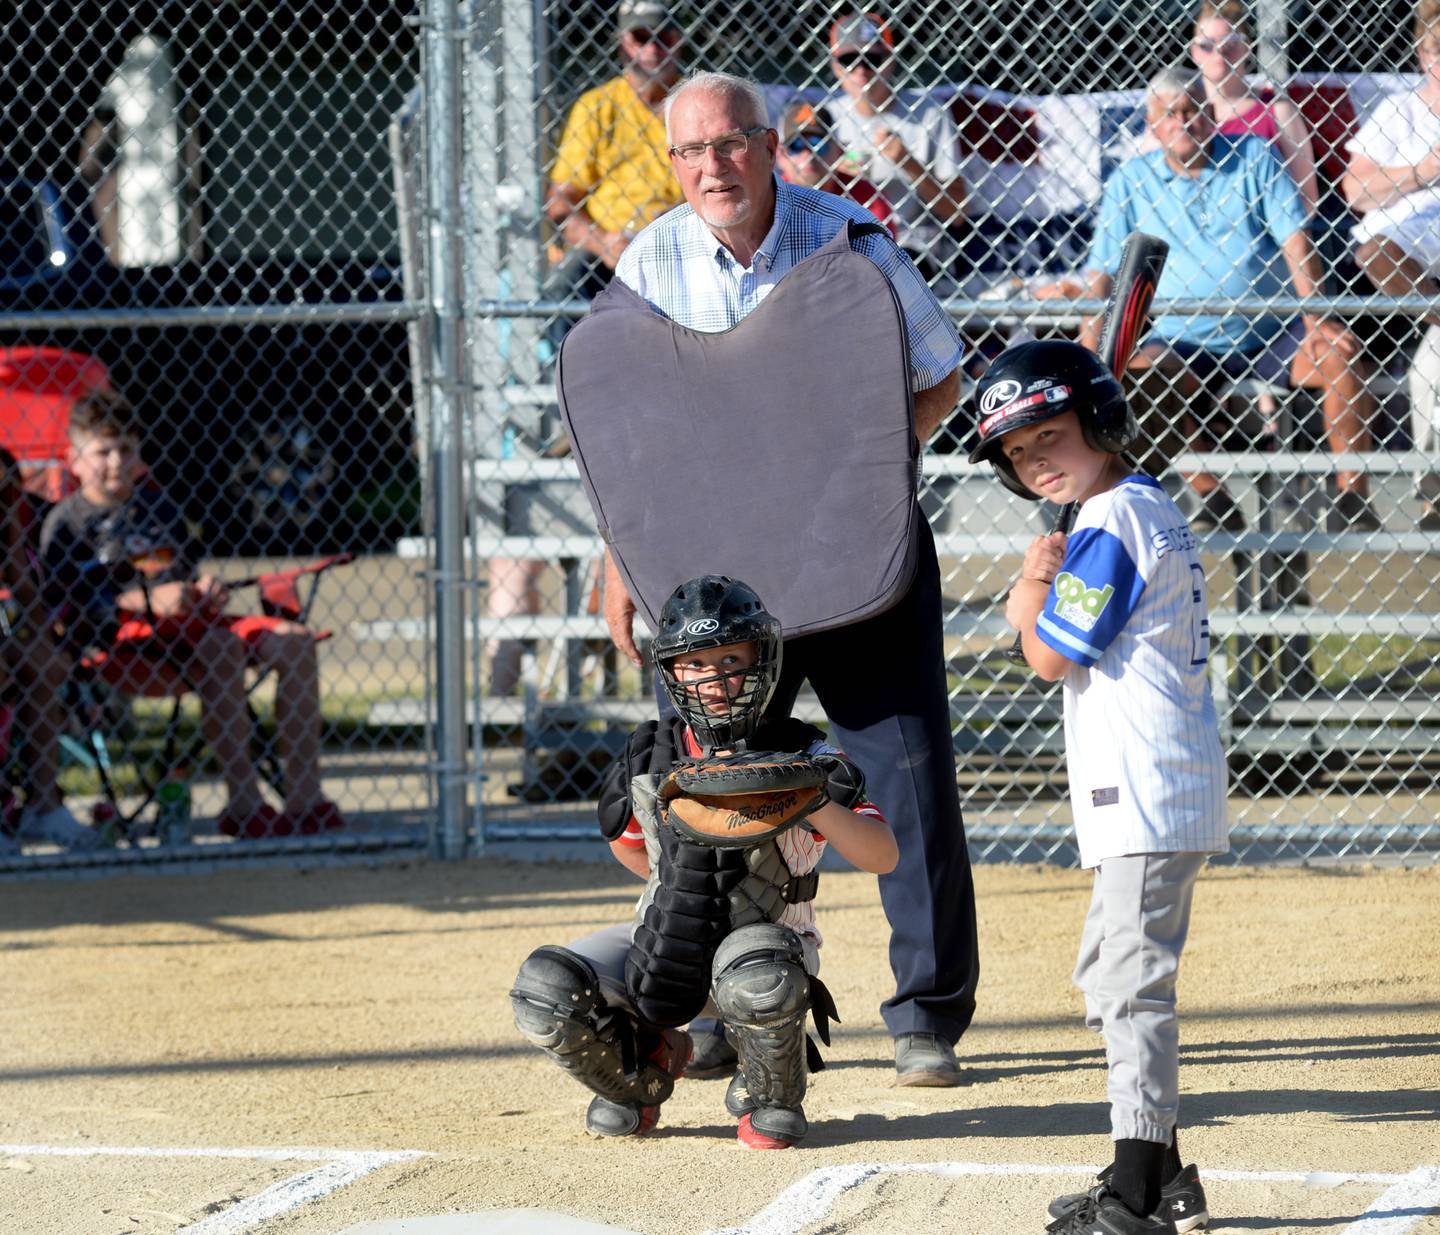 Retired MLB umpire Larry Young was behind the plate for the ceremonial first pitch of the inaugural baseball game between the Oregon Blue and Oregon Red teams following the renaming of the field at Lion's Park in Young's honor on Friday, June 14, 2024. Pictured with Young are catcher Grady Grover and batter Sebastian Murphy. The first pitch was delivered by Huddson Long. Young grew up in Oregon and started his umpiring career calling games for the Oregon Park District at Lions Park.